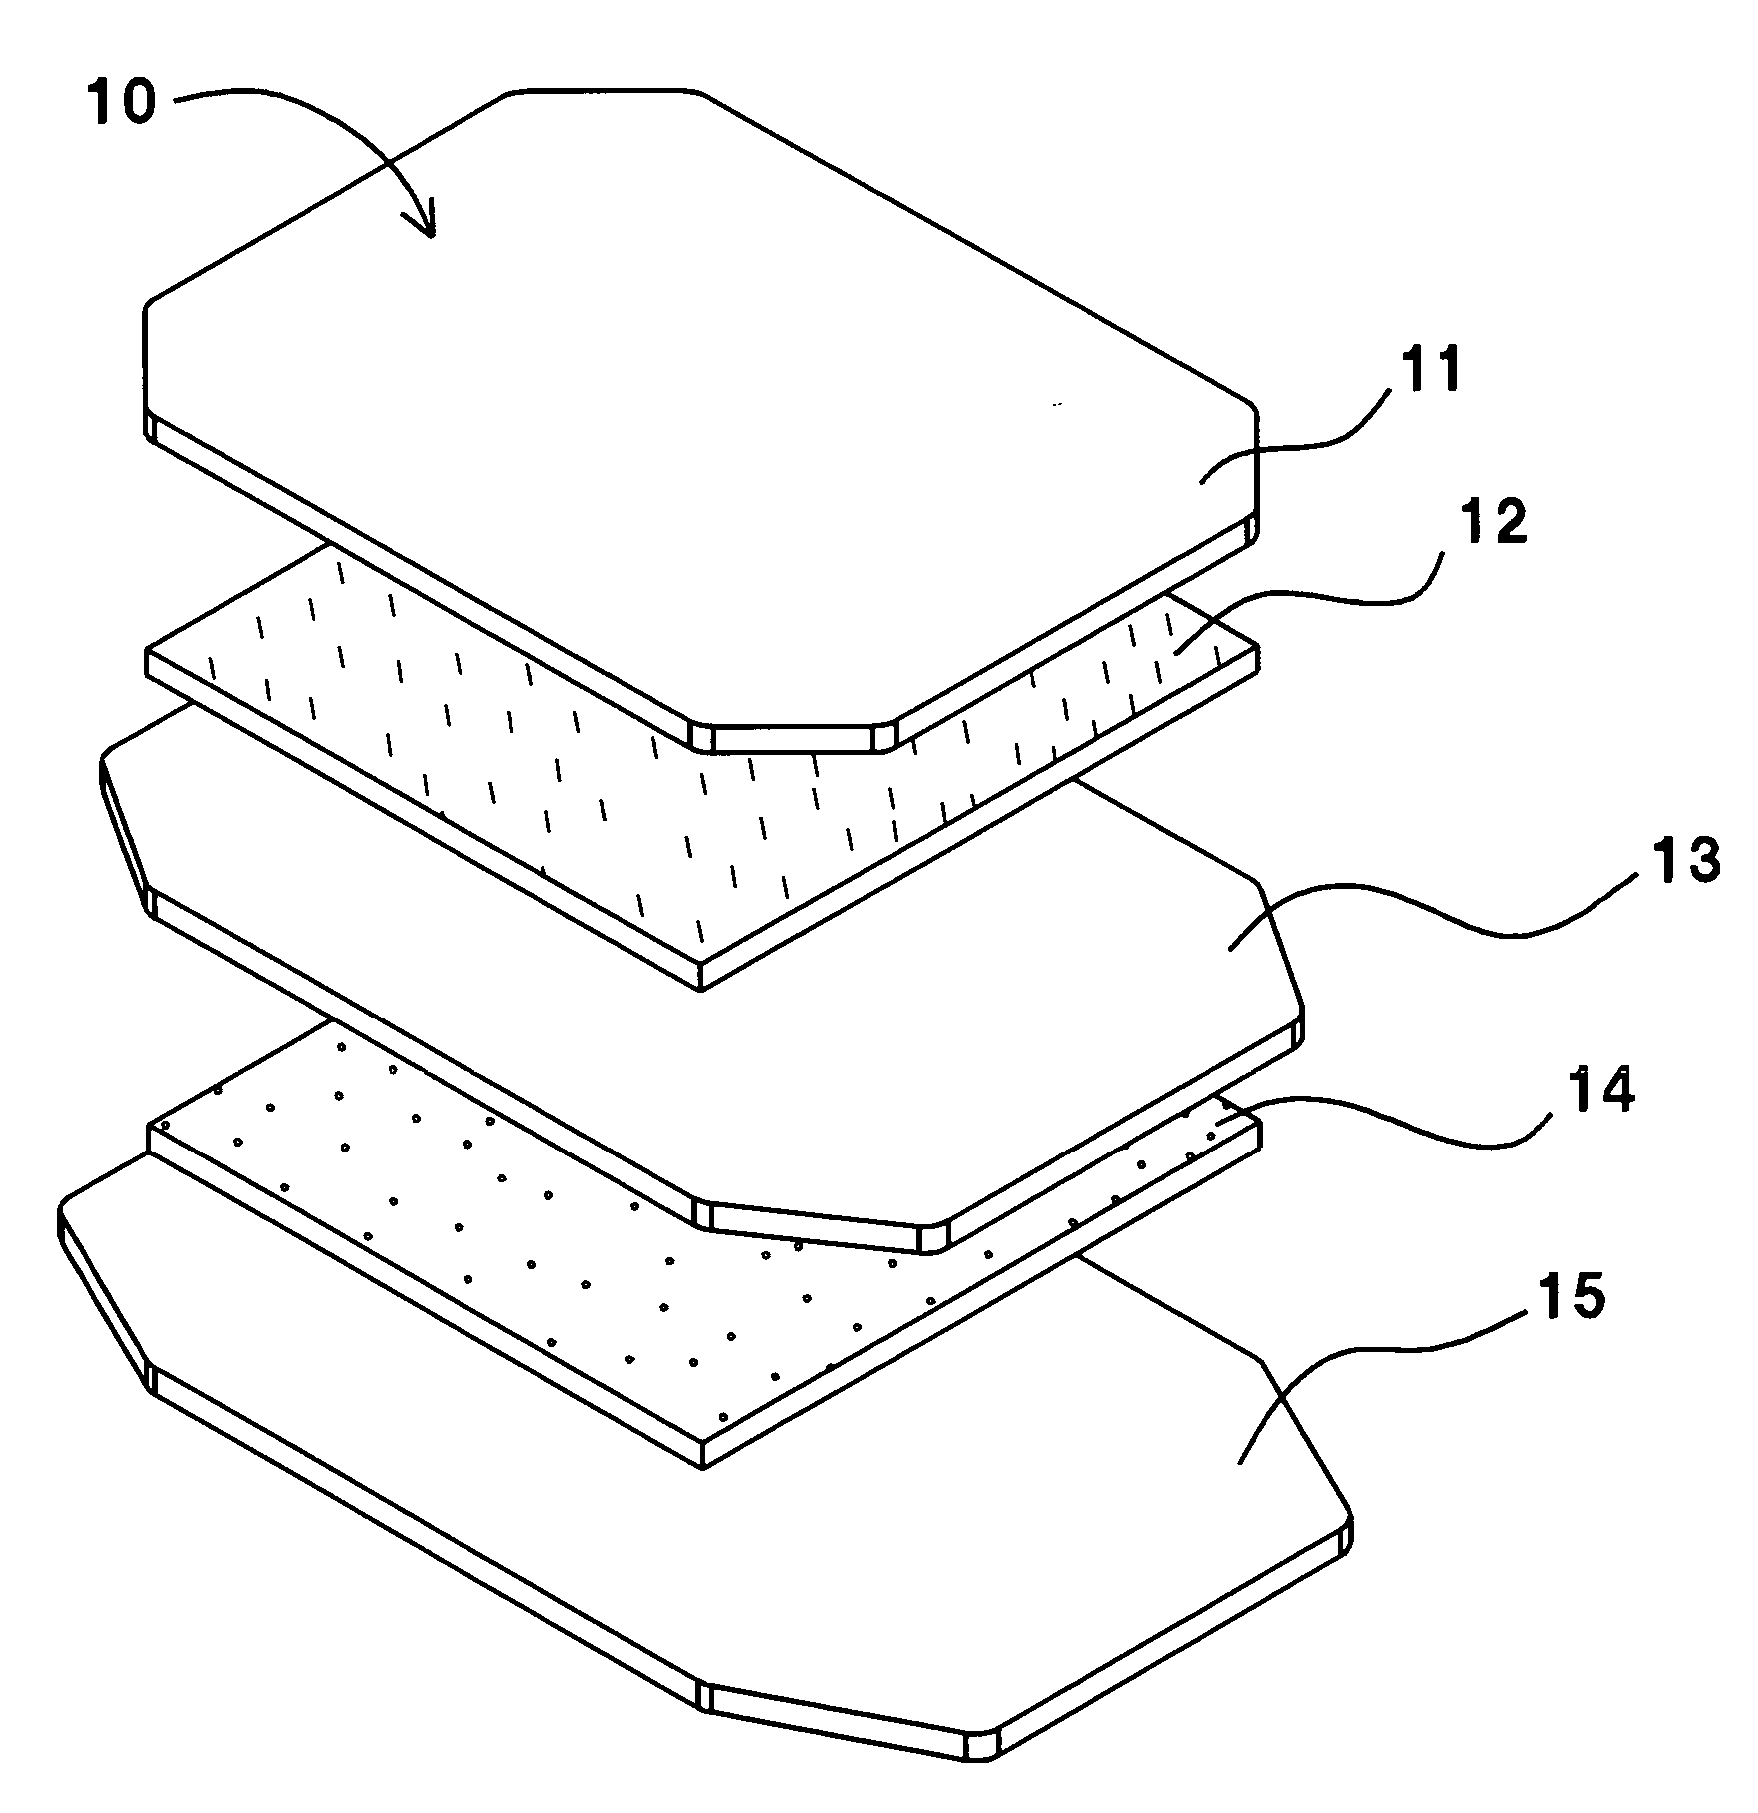 Disposable medical article with multiple adhesives for skin attachment